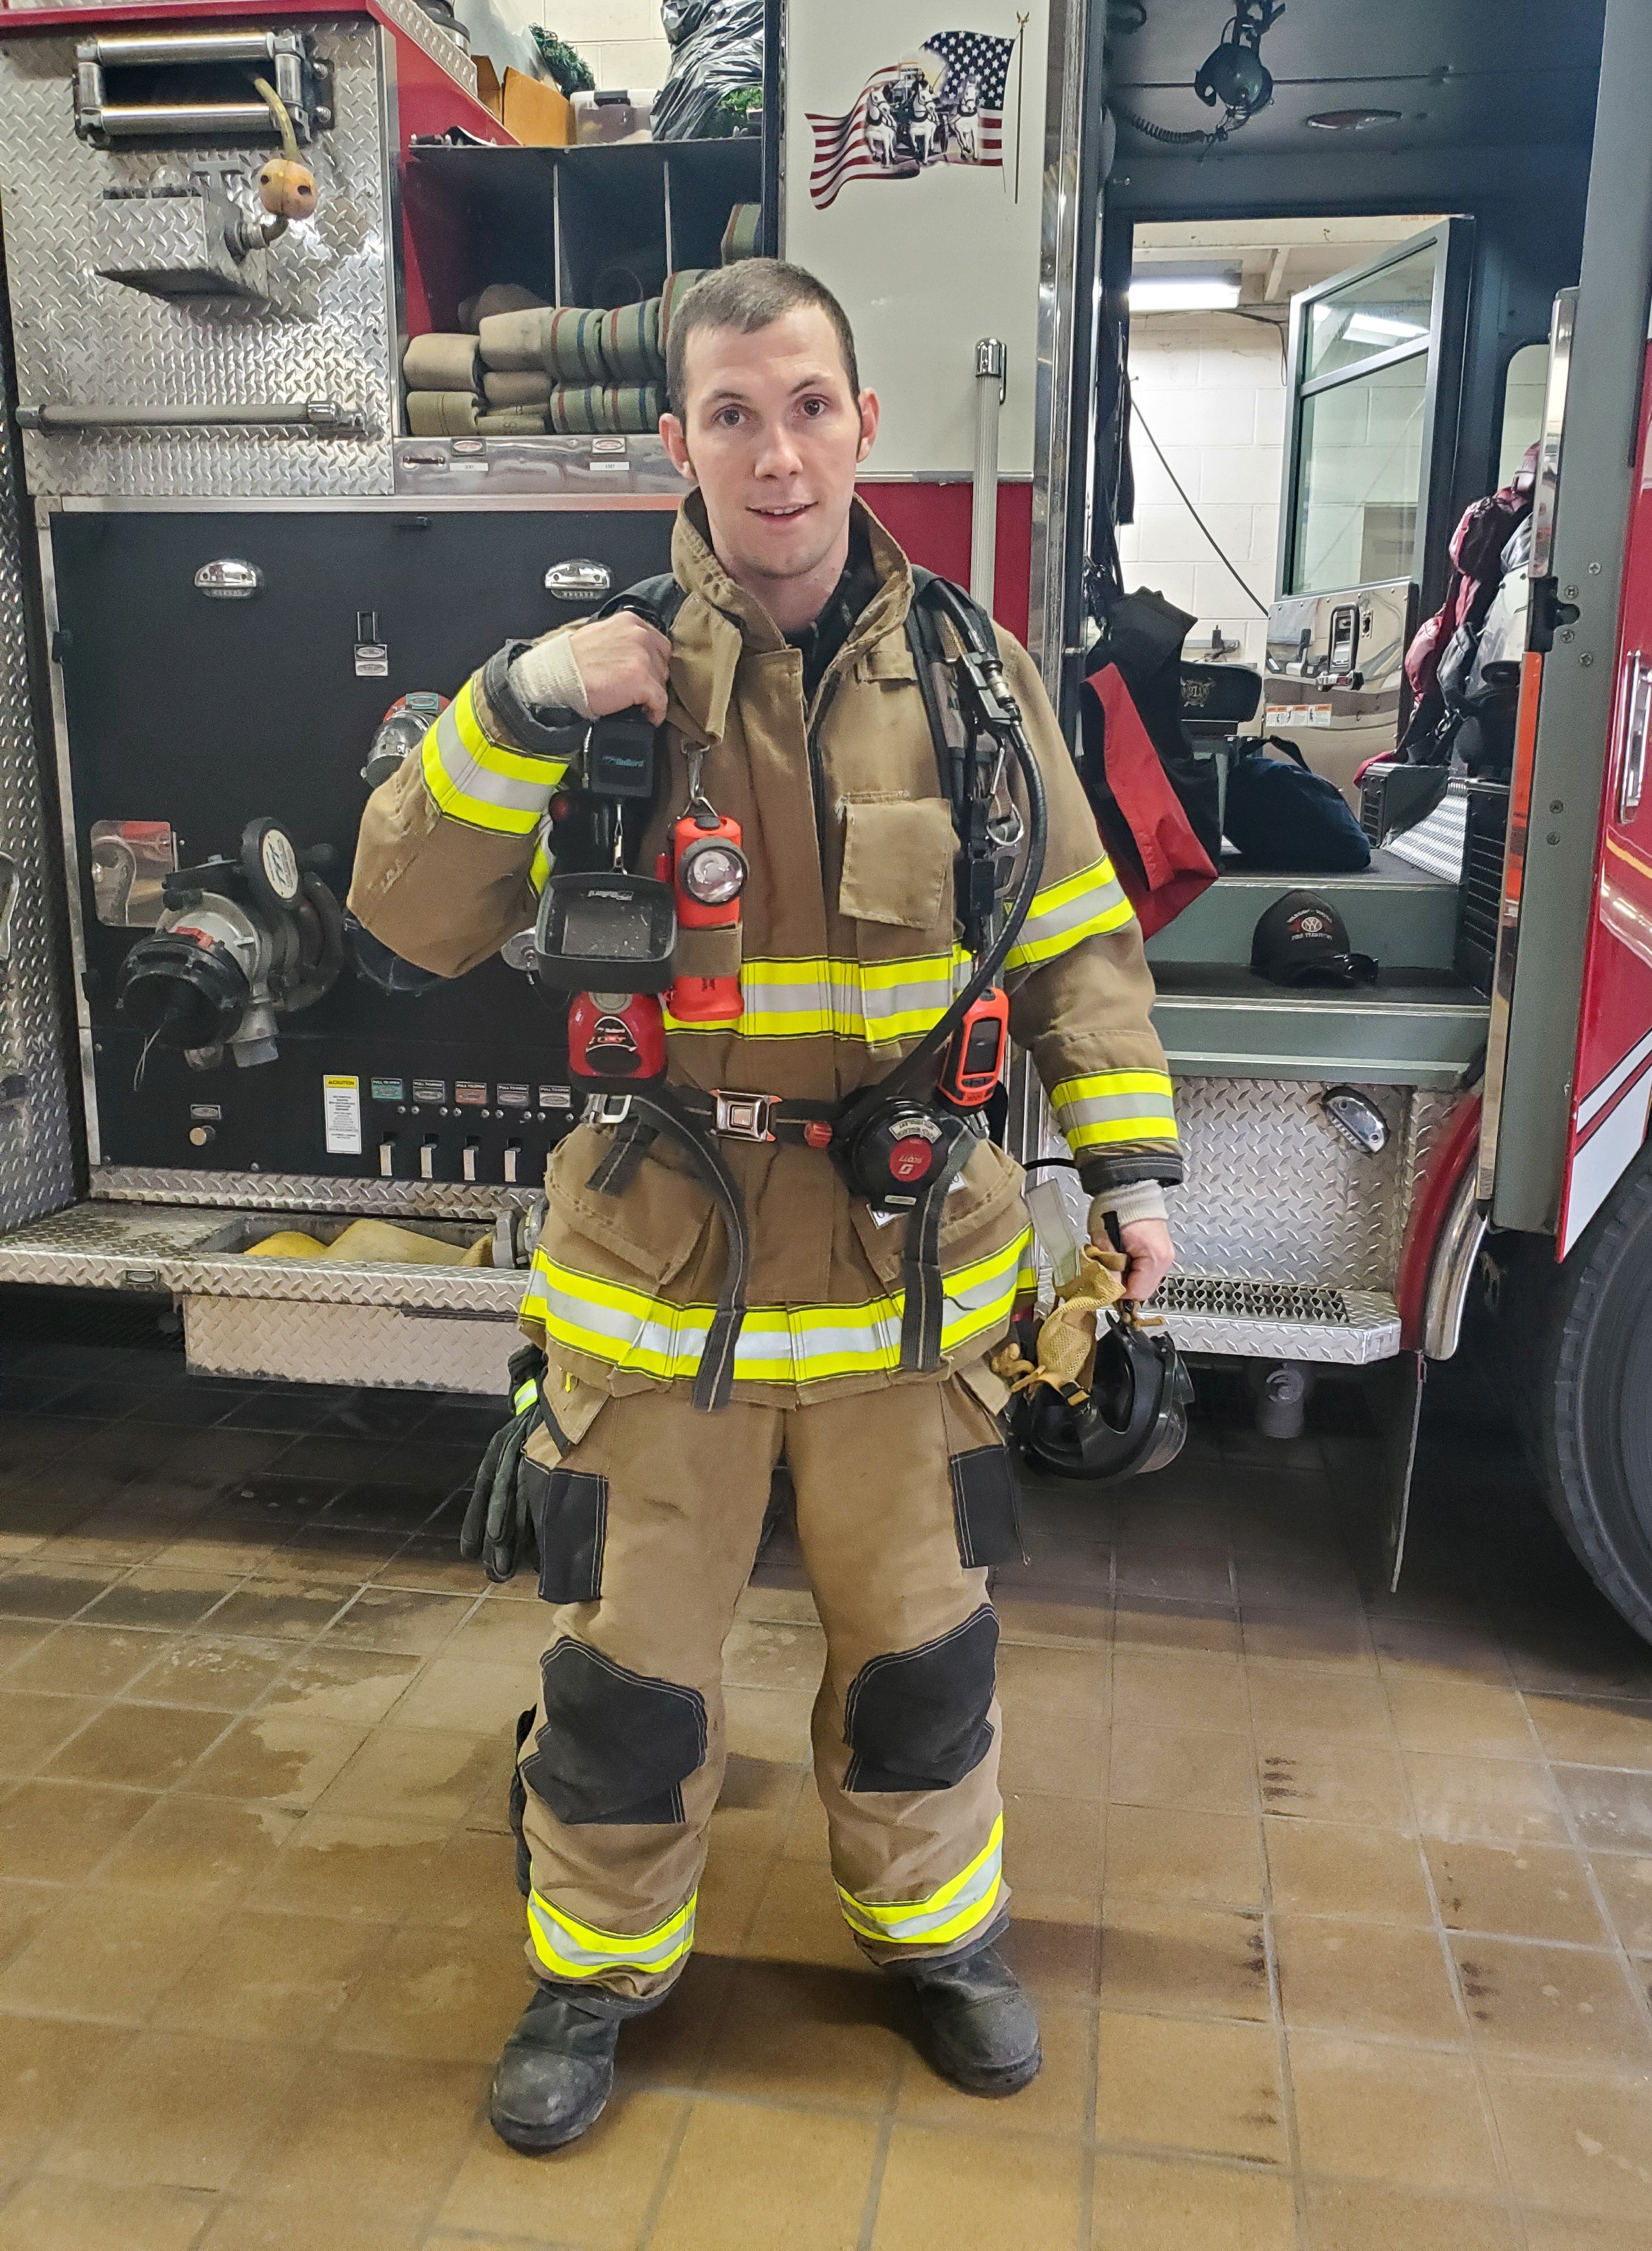 Firefighter Brice Good demonstrates the gear the firefighters typically put on for call.